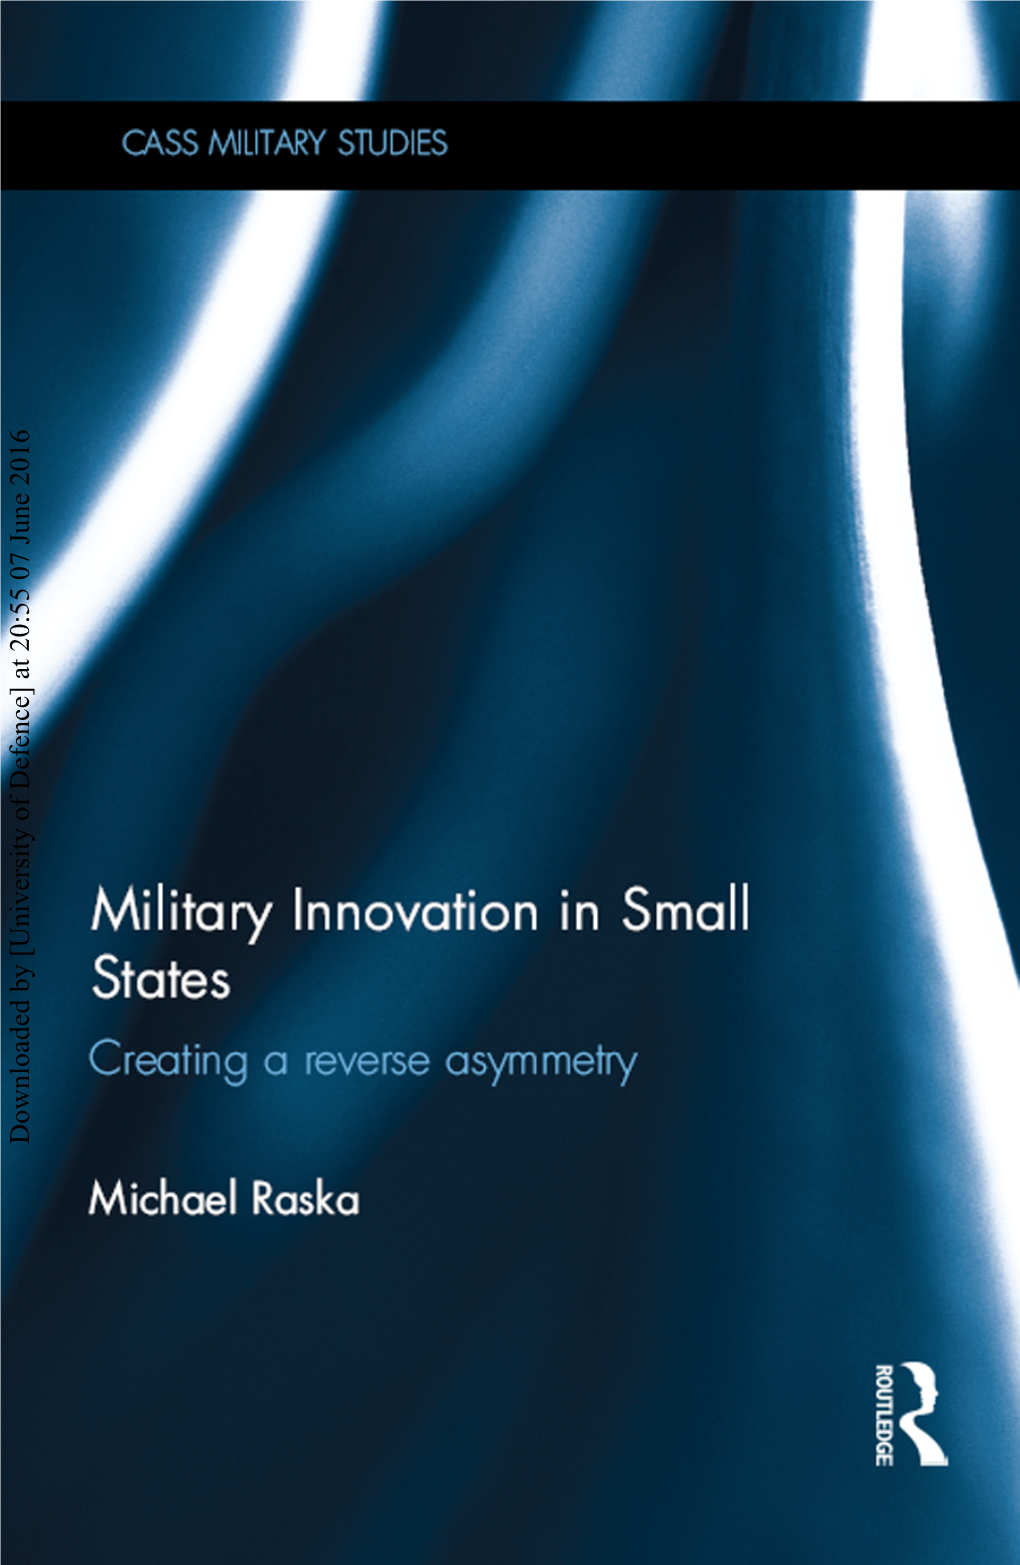 Military Innovation in Small States: Creating a Reverse Asymmetry / Michael Raska